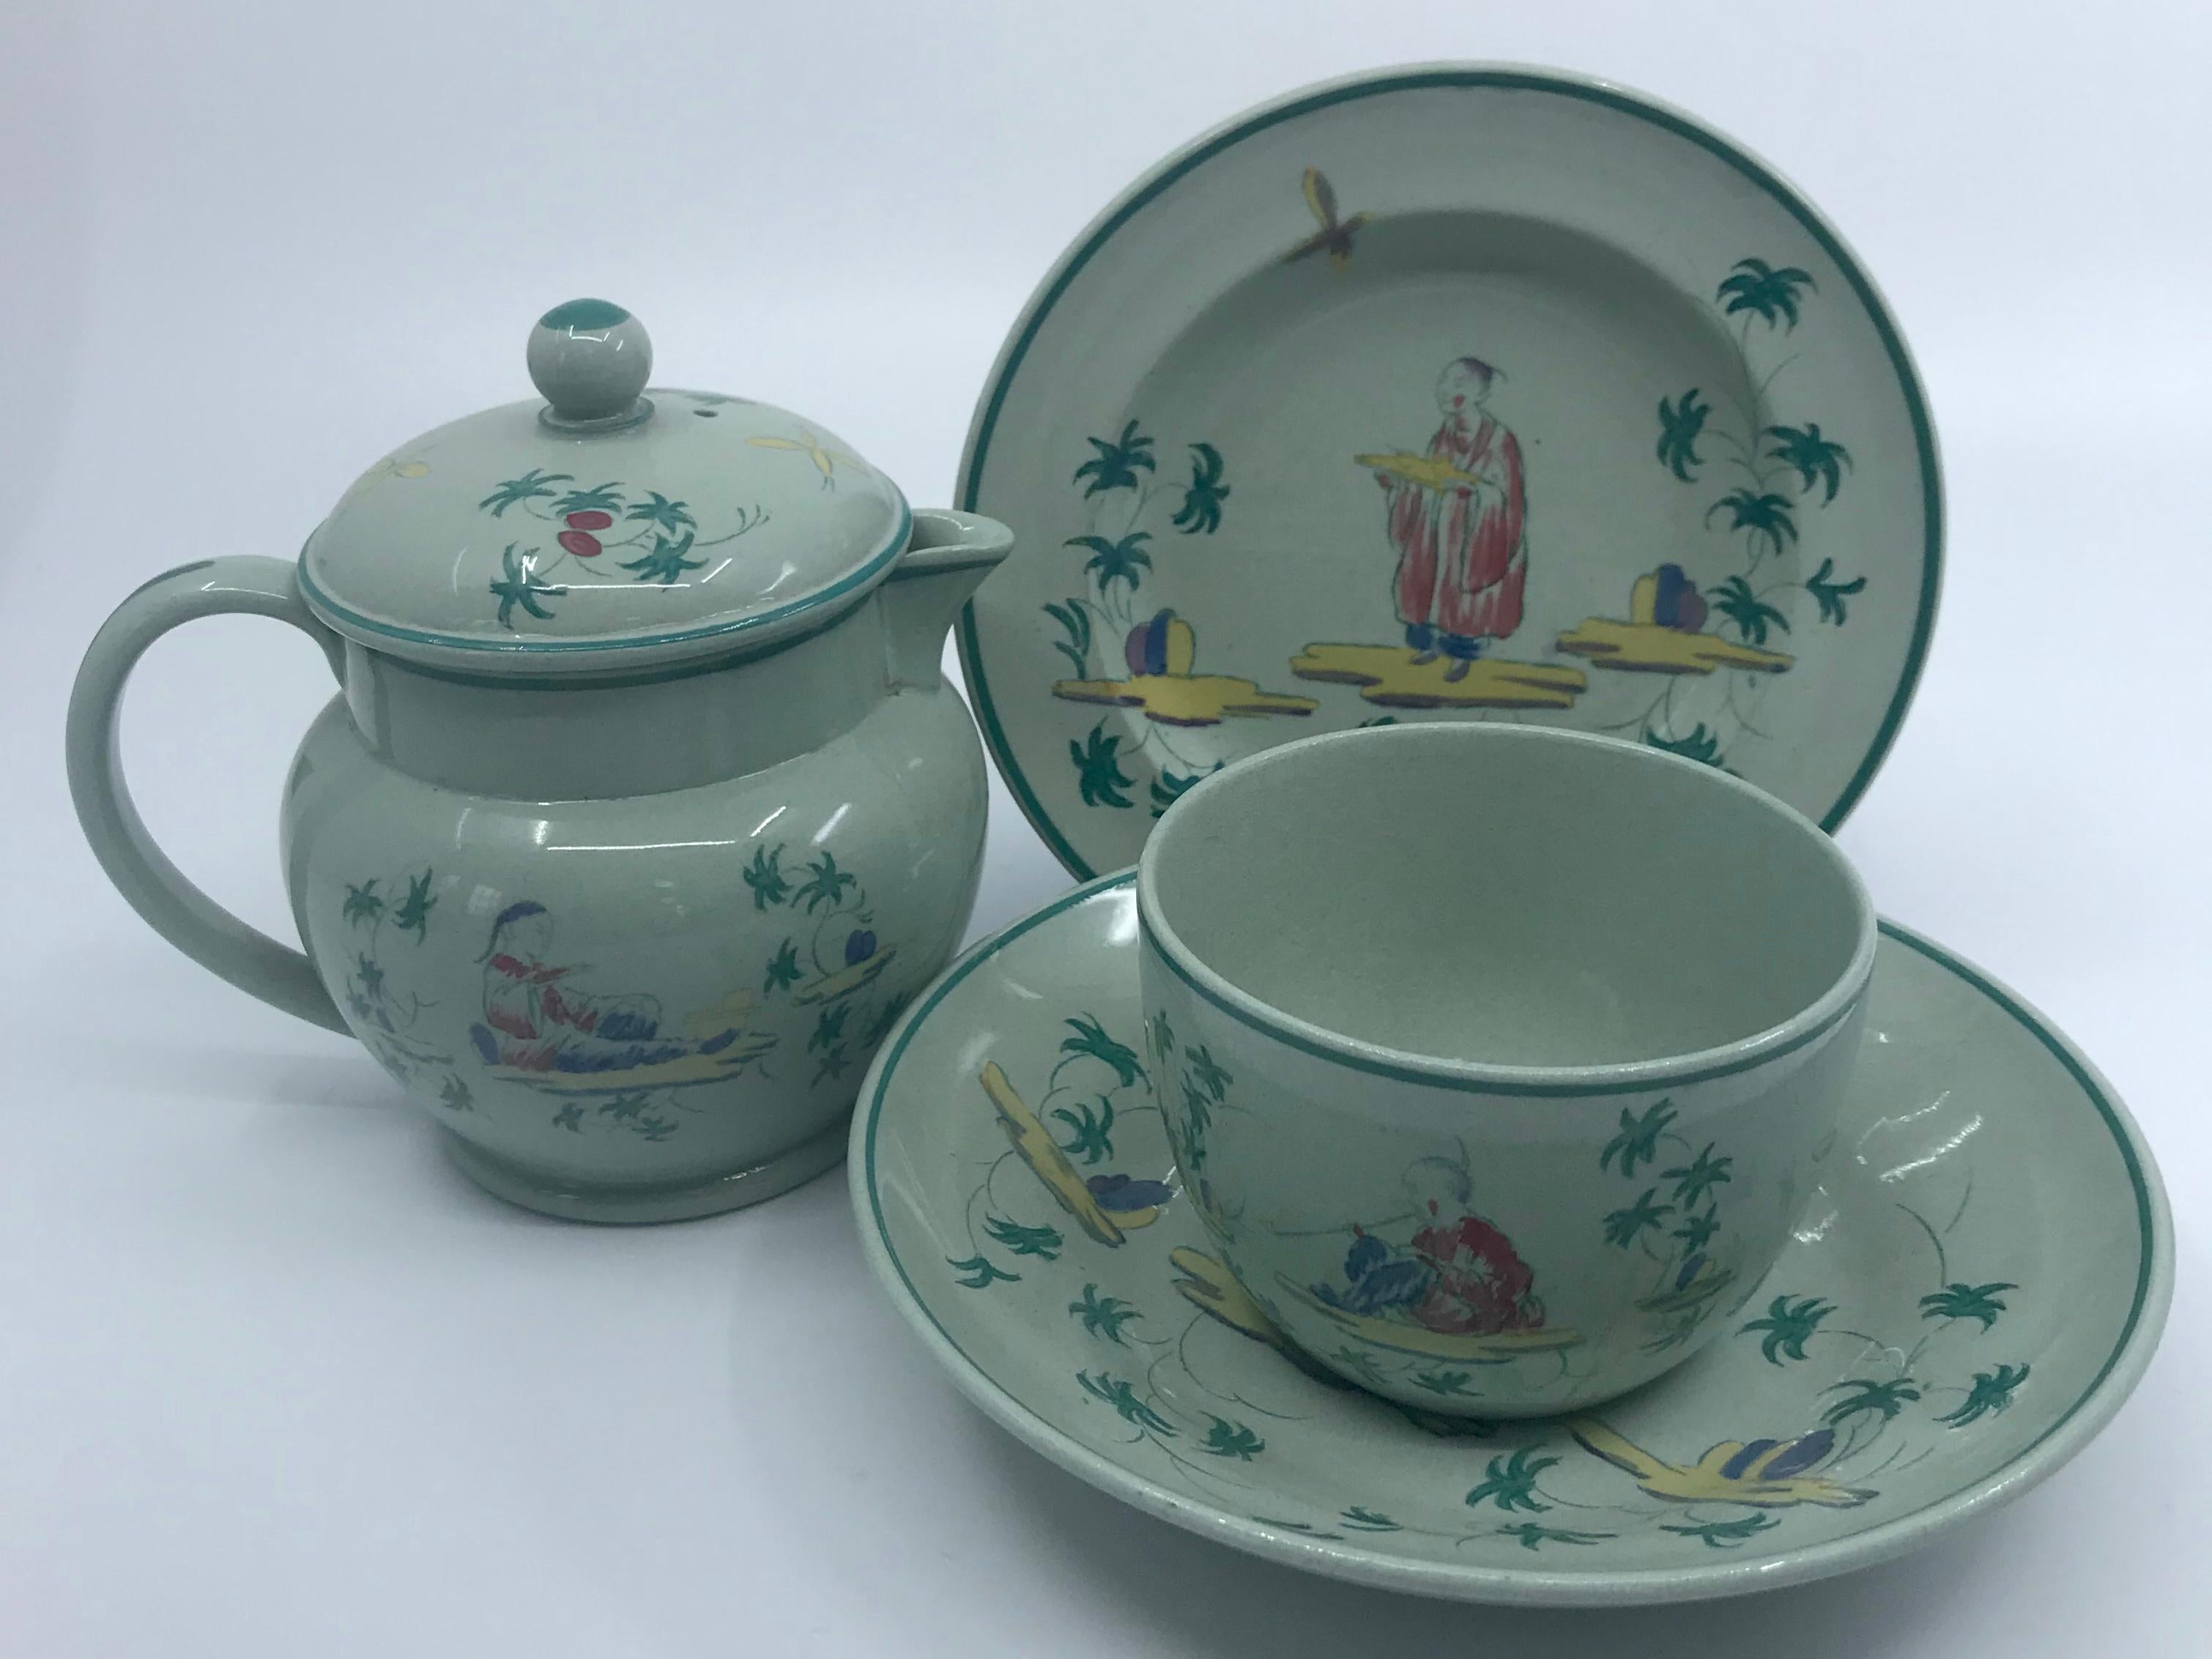 Early 20th Century Wedgwood Apprey Celadon Chinoiserie Tea Set For Sale